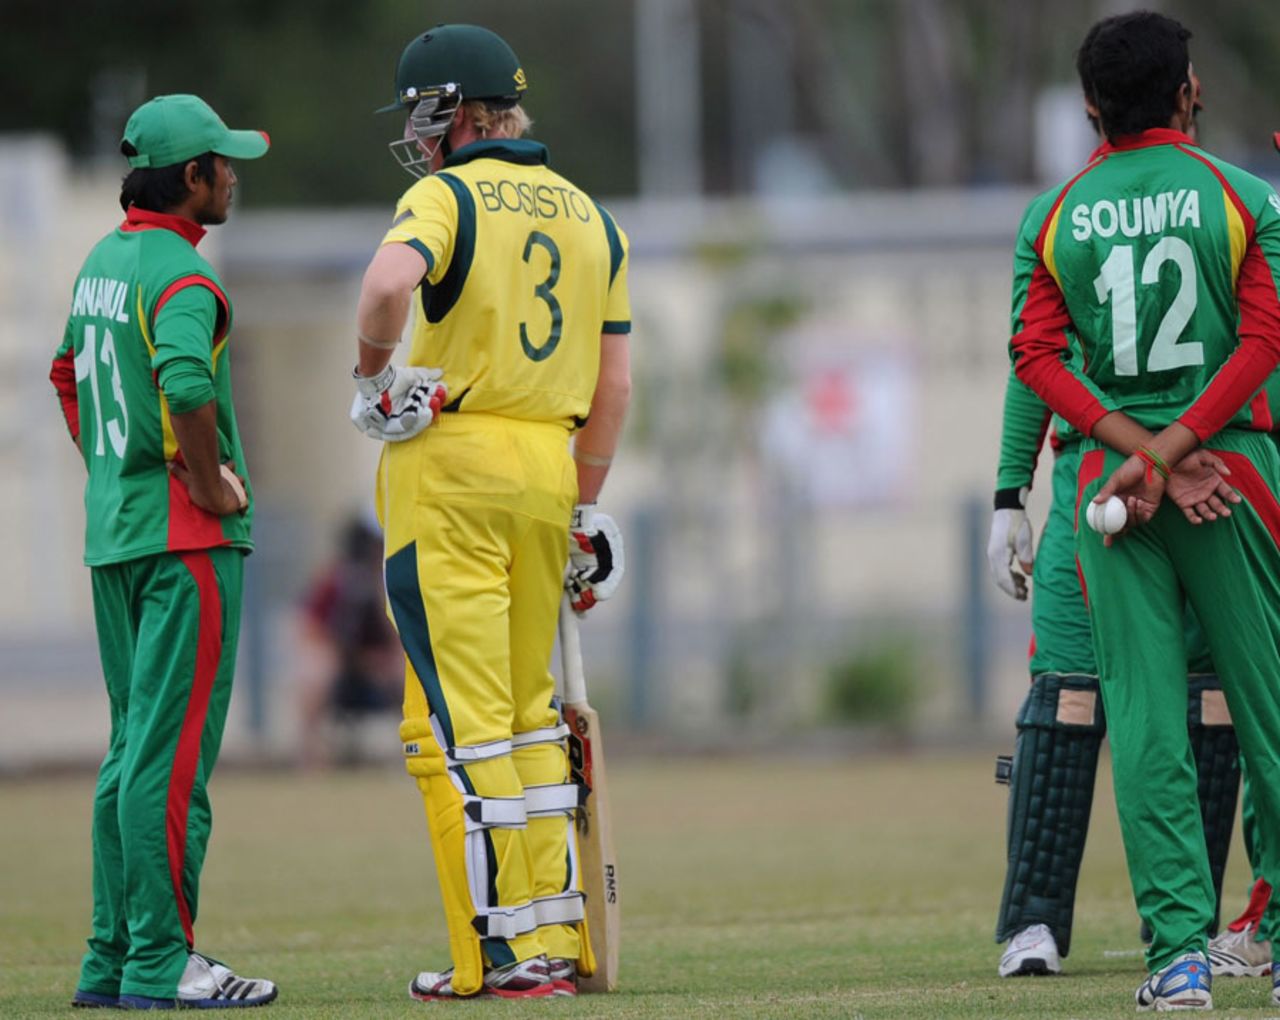 Anamul Haque and William Bosisto talk after Soumya Sarkar Mankaded Jimmy Peirson, Australia v Bangladesh, quarter-final, ICC Under-19 World Cup, Townsville, August 19, 2012